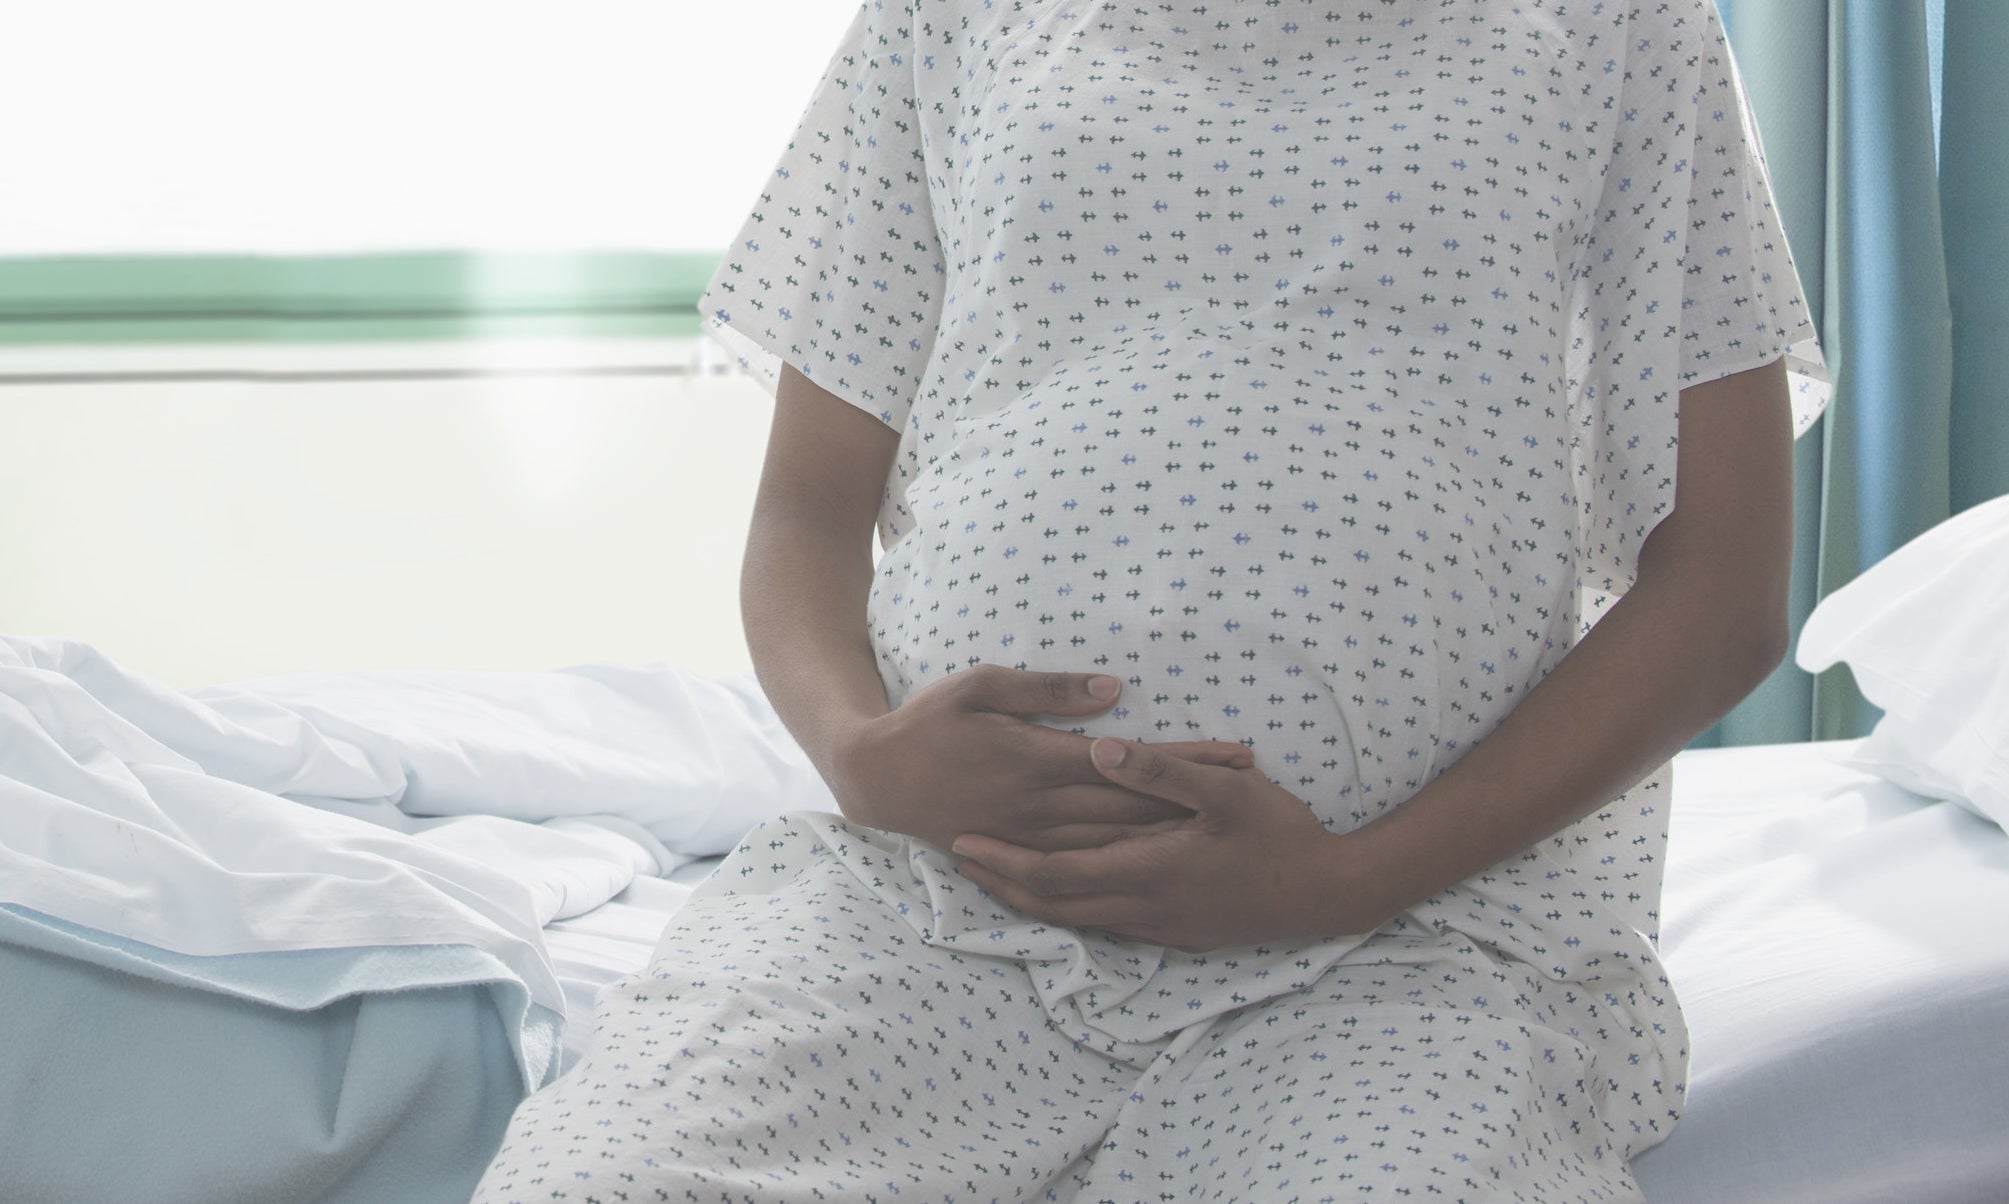 pregnant woman in a hospital gown on a hospital bed